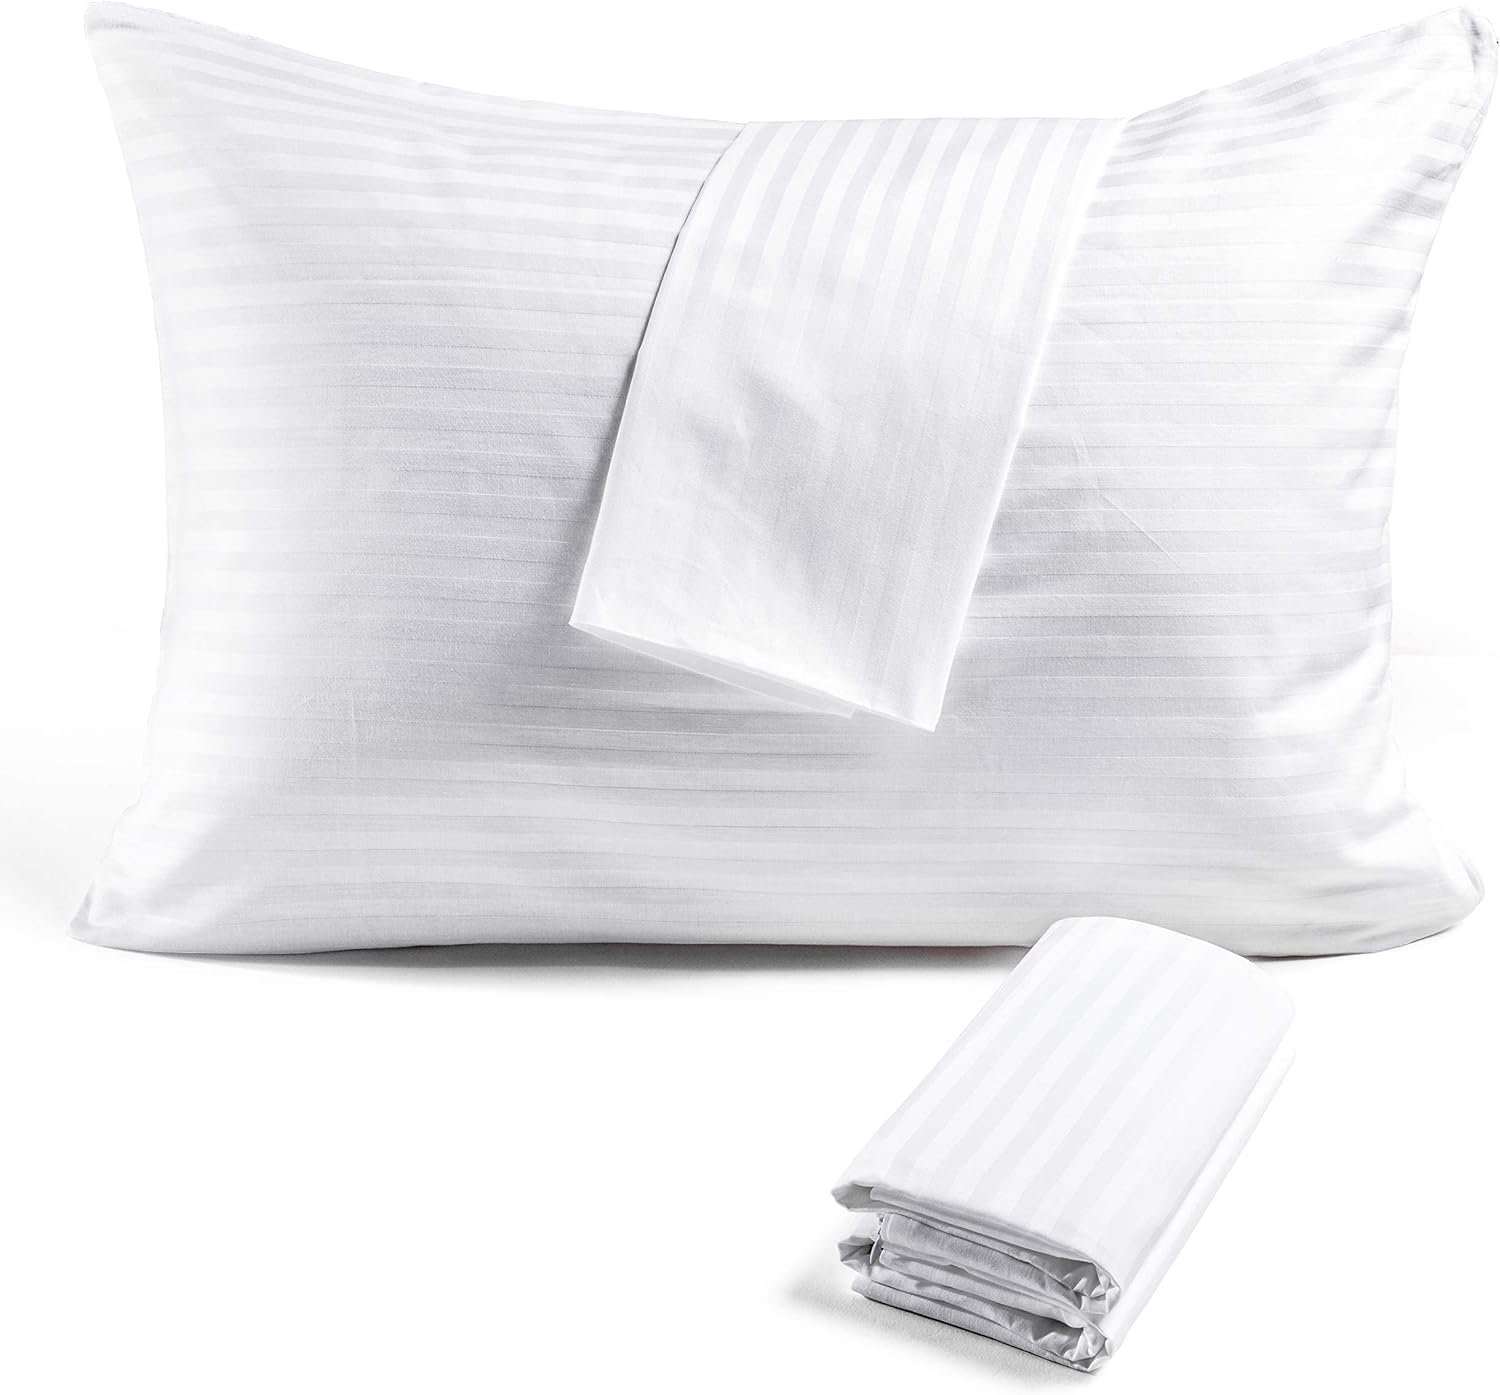 FAUNNA Hidden Zippered Pillow Protectors Covers Queen Size Set of 4 - Soft Quiet Sateen 100% Long-Staple Cotton Cases -Comfortable and Cozy White Bed Pillow Cover